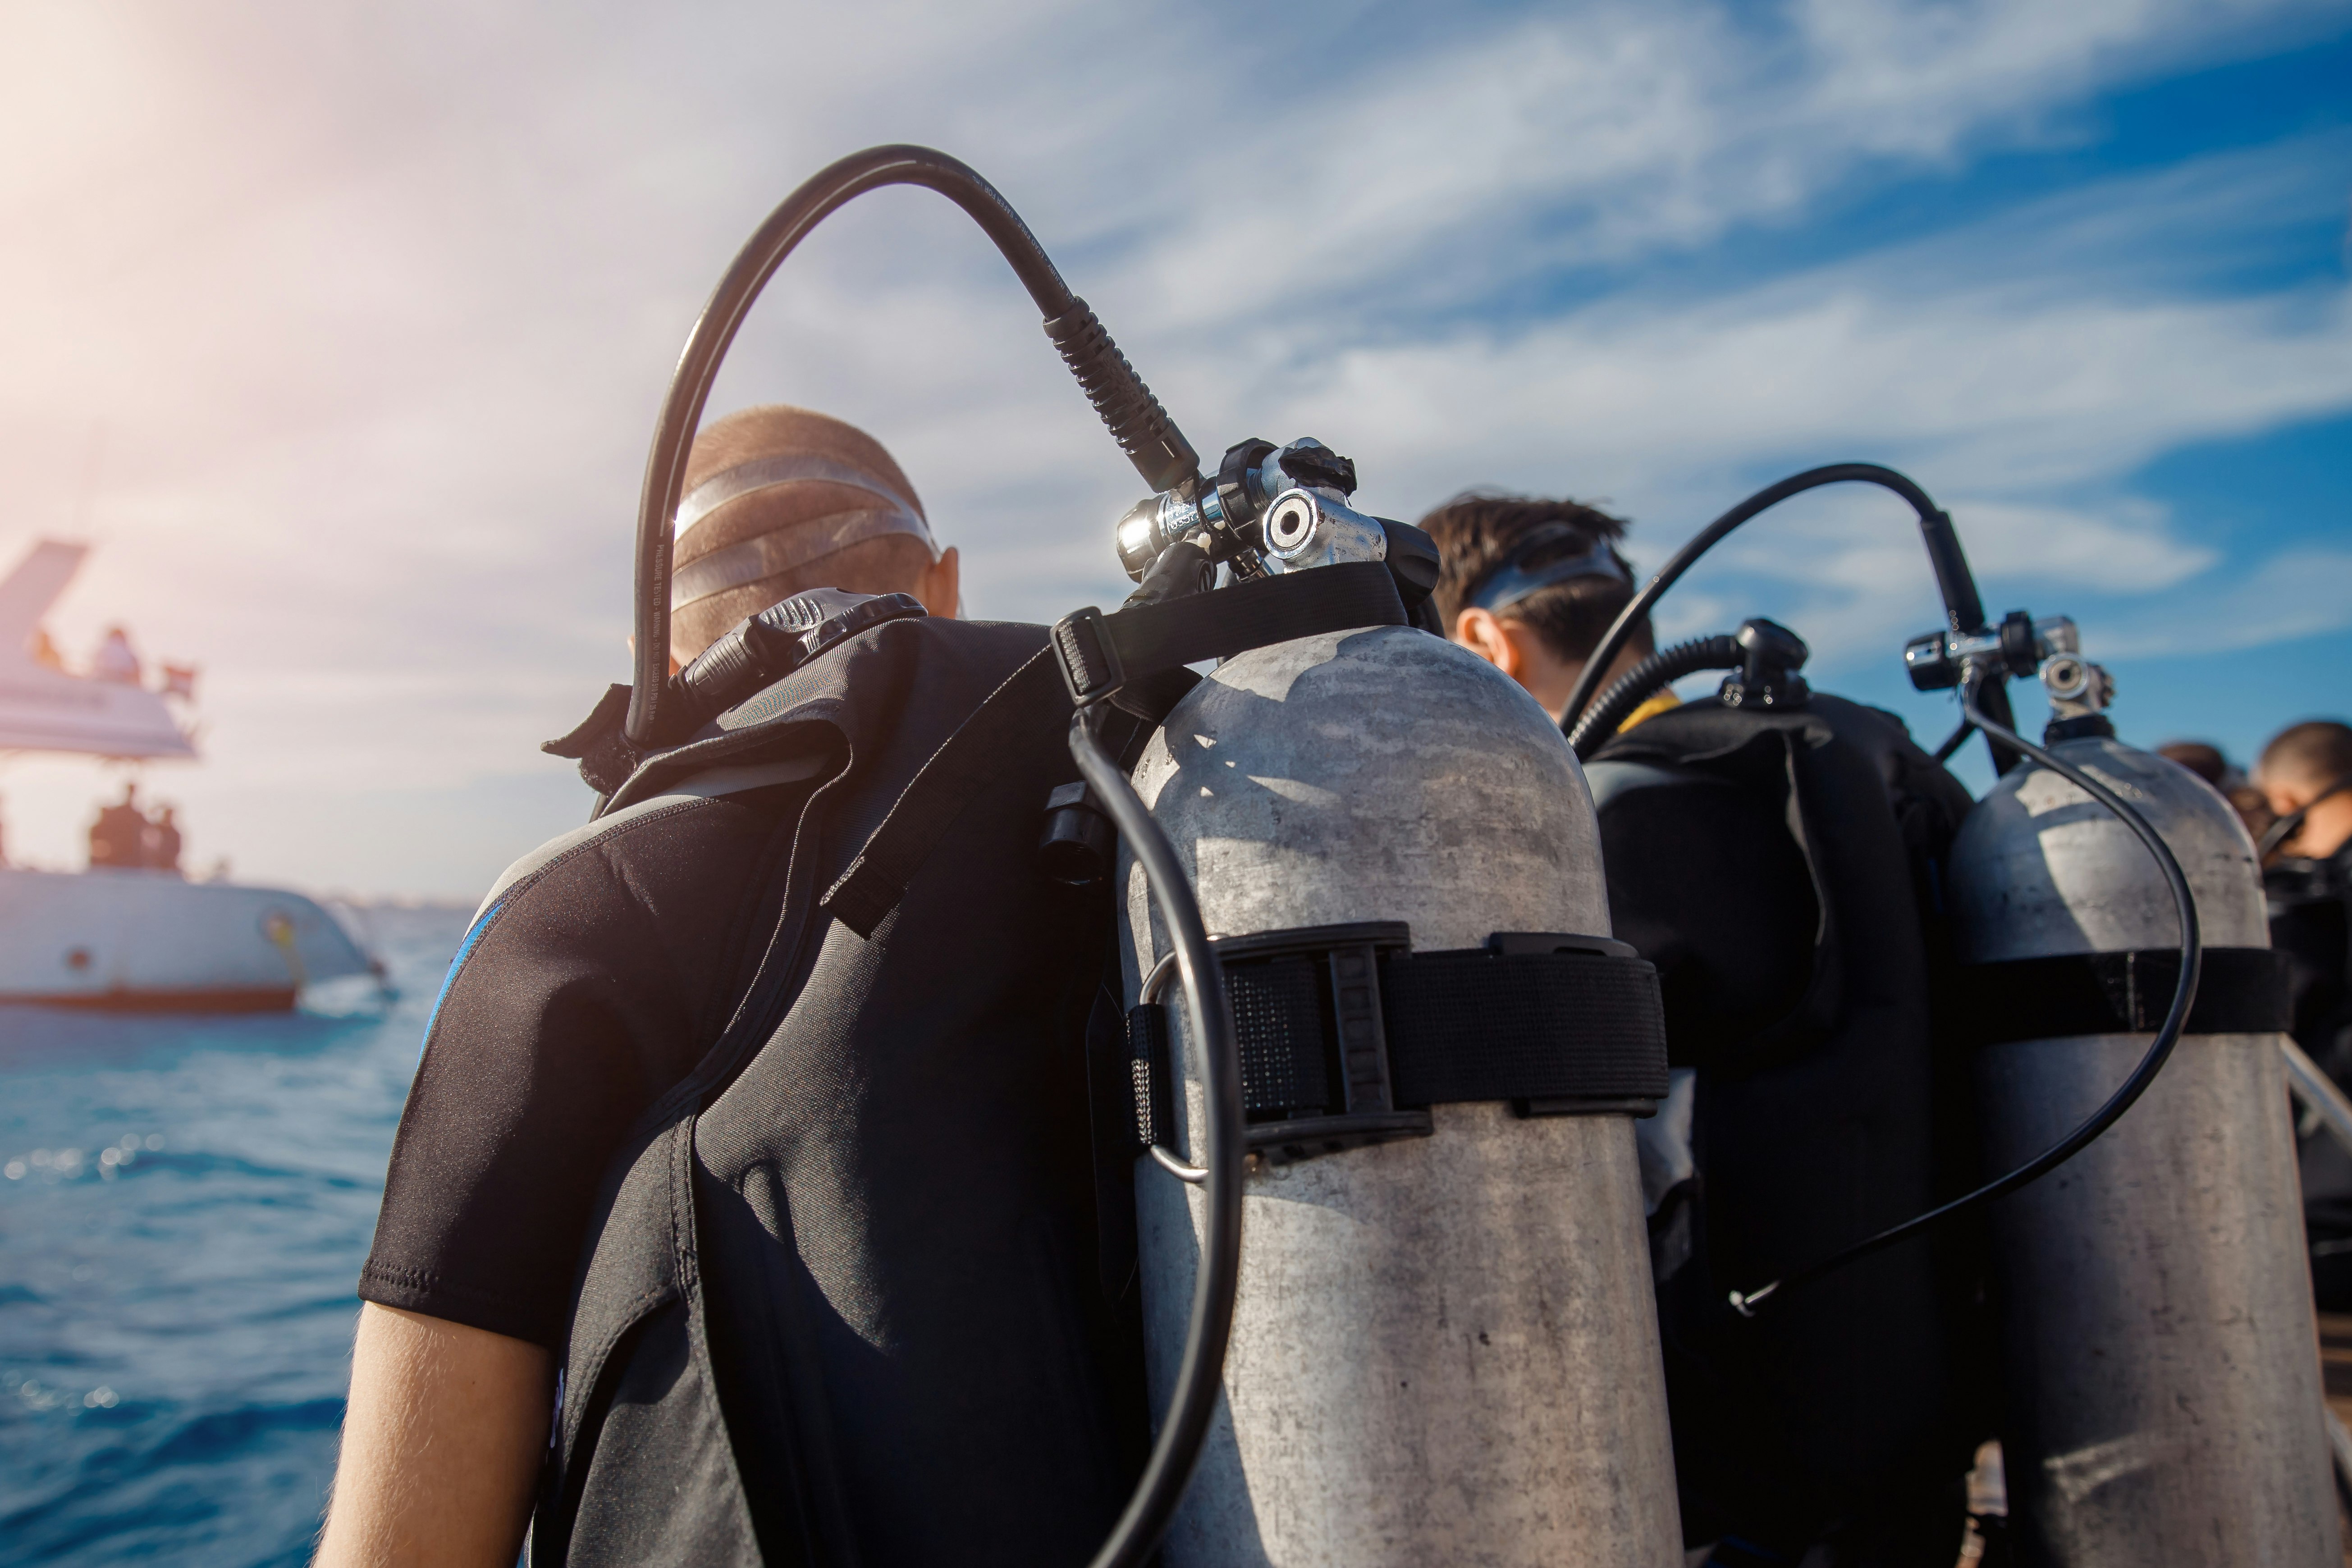 When diving as a complementary activity to sailing, take care of safety and dive with buddy